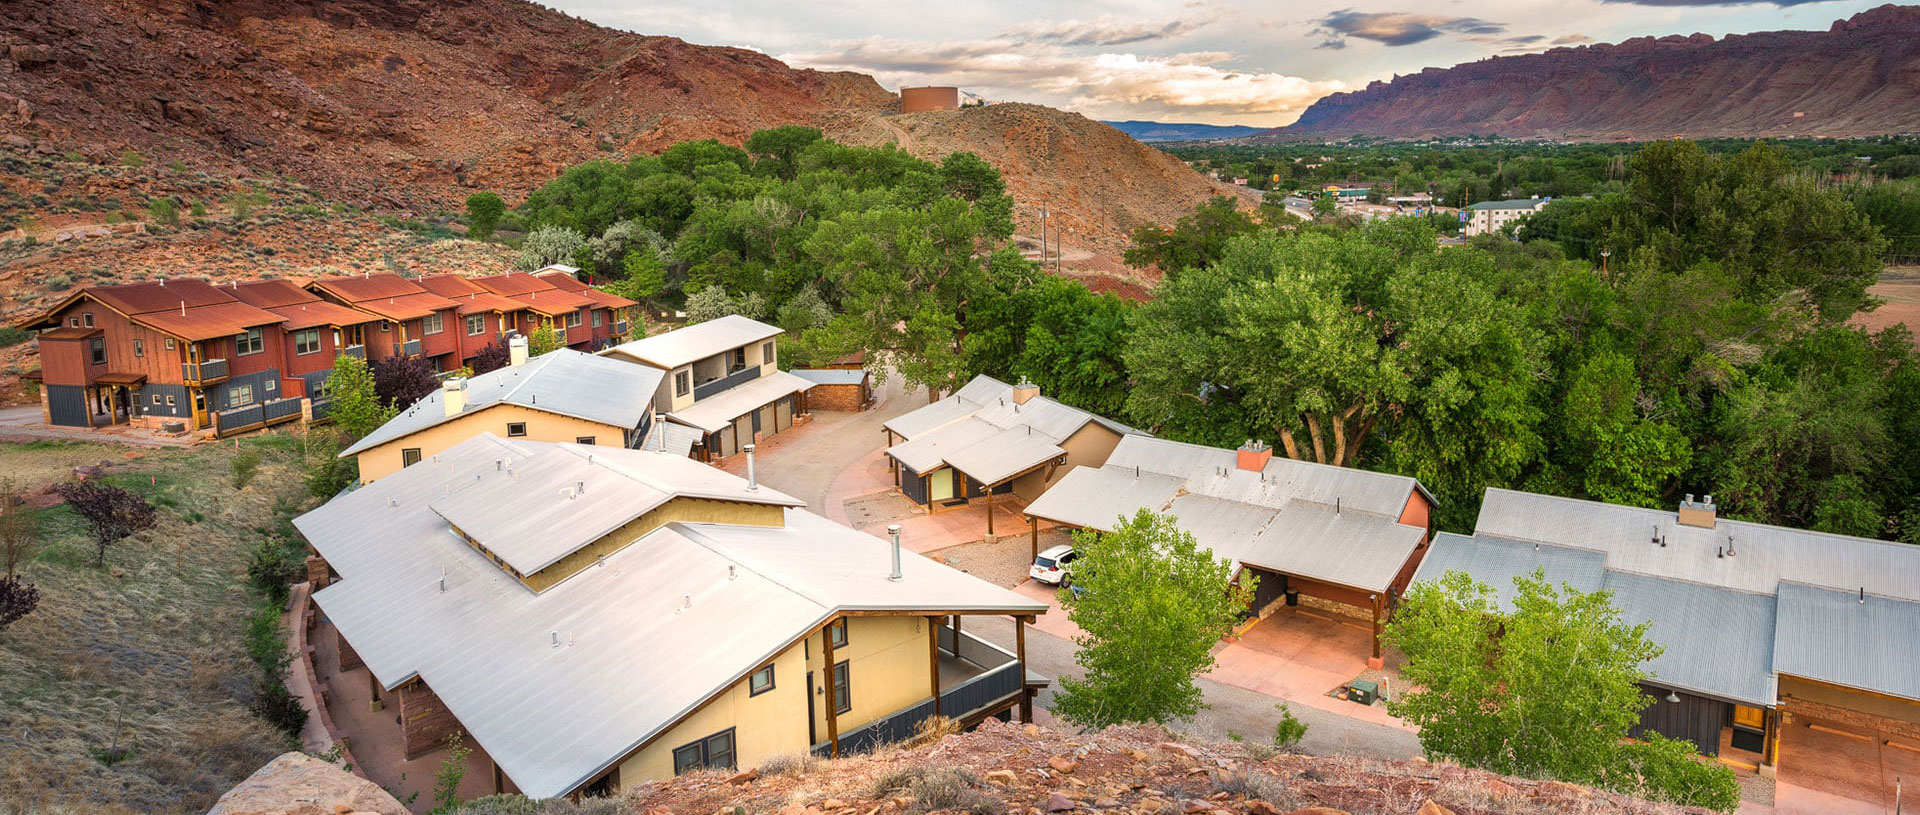 An aerial view overlooking the trees, roads, mountainsides and the roofs of townhouses and bungalows on the Moab Springs Ranch property.